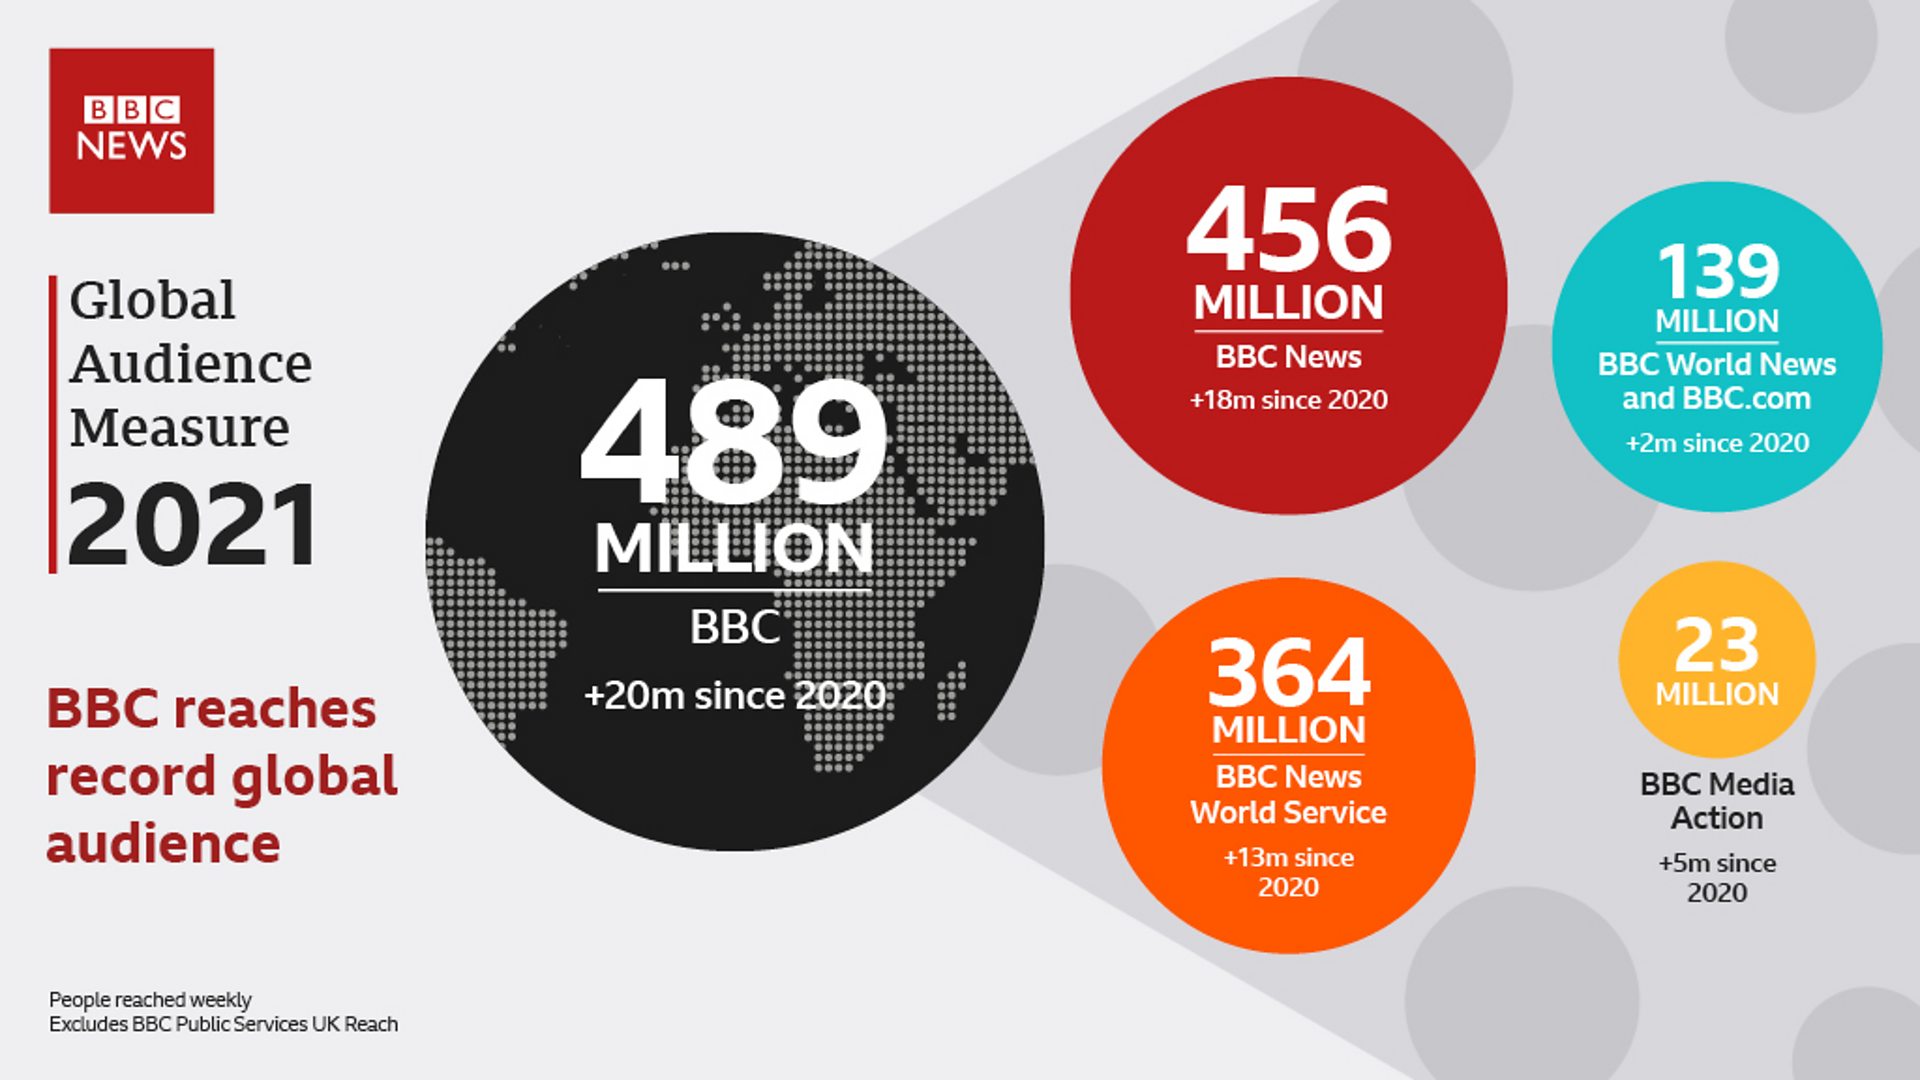 bbc-on-track-to-reach-half-a-billion-people-globally-ahead-of-its